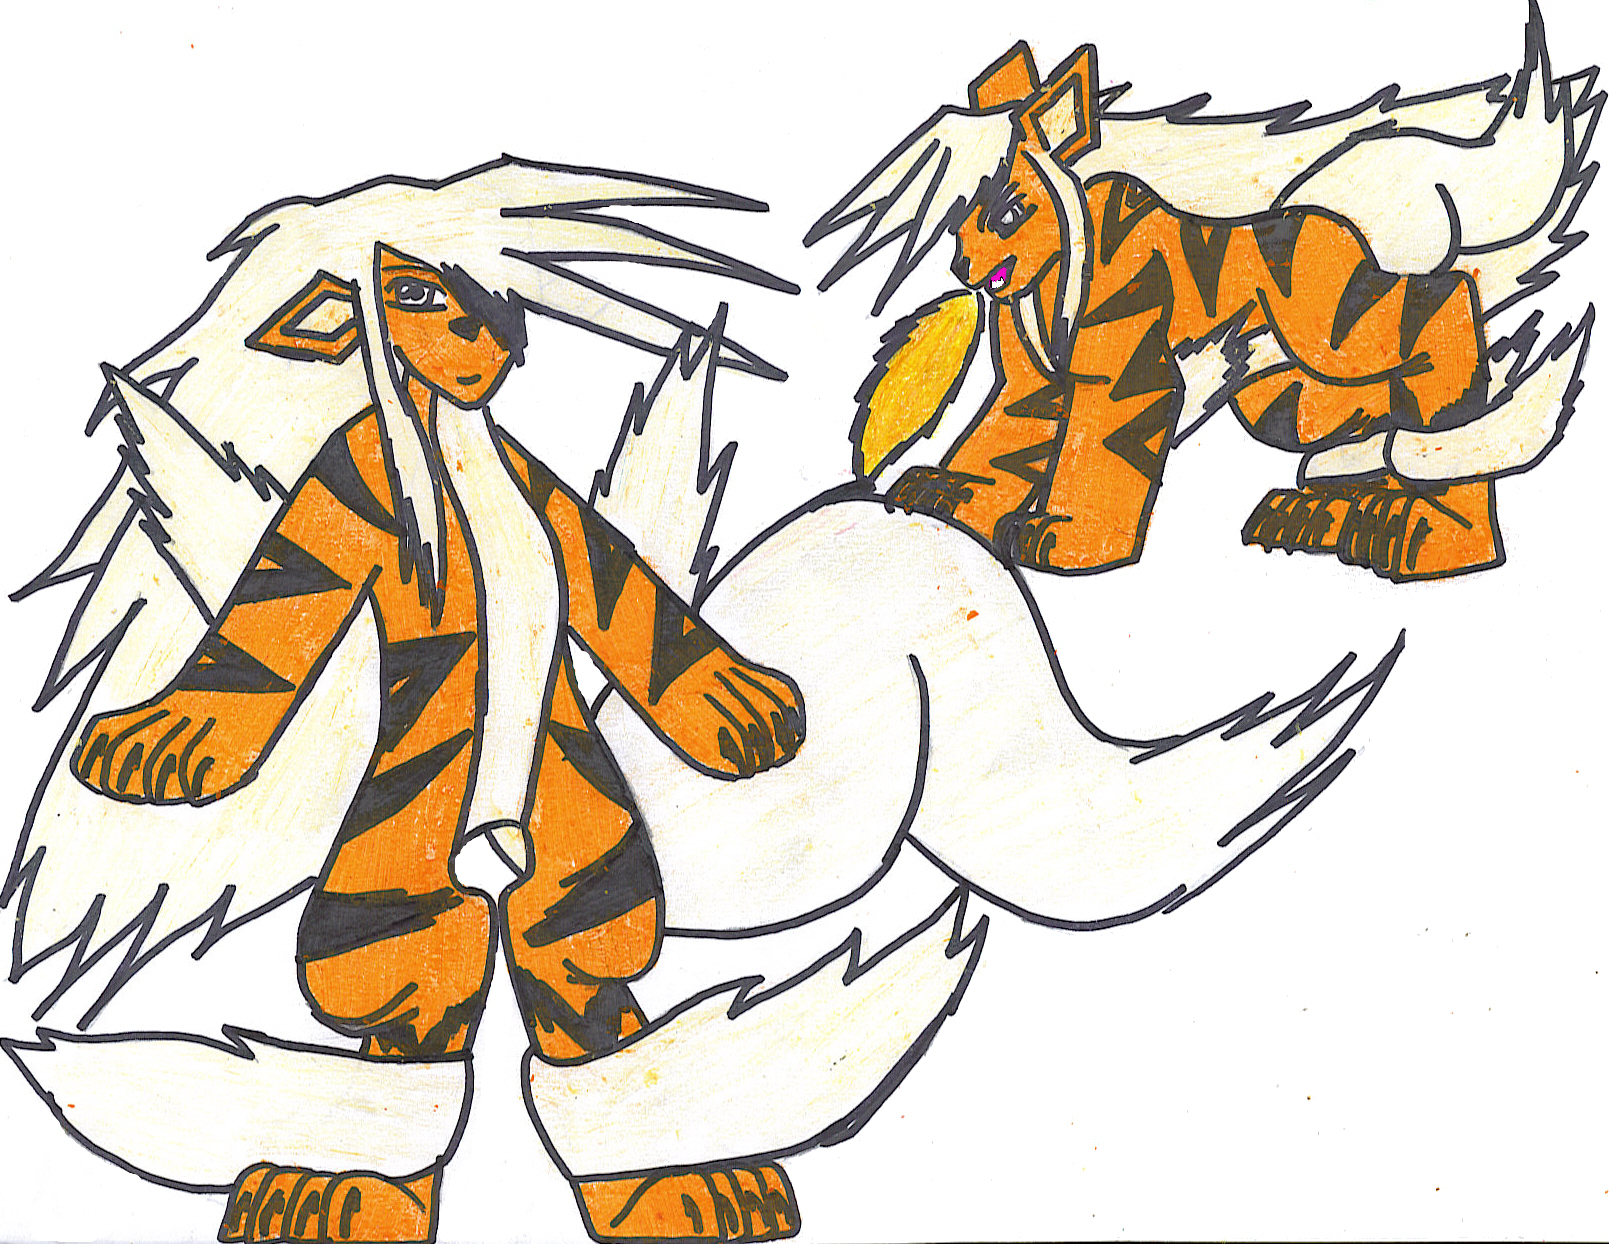 Arcanine Girl by Yami_And_The_Fallen_Angel